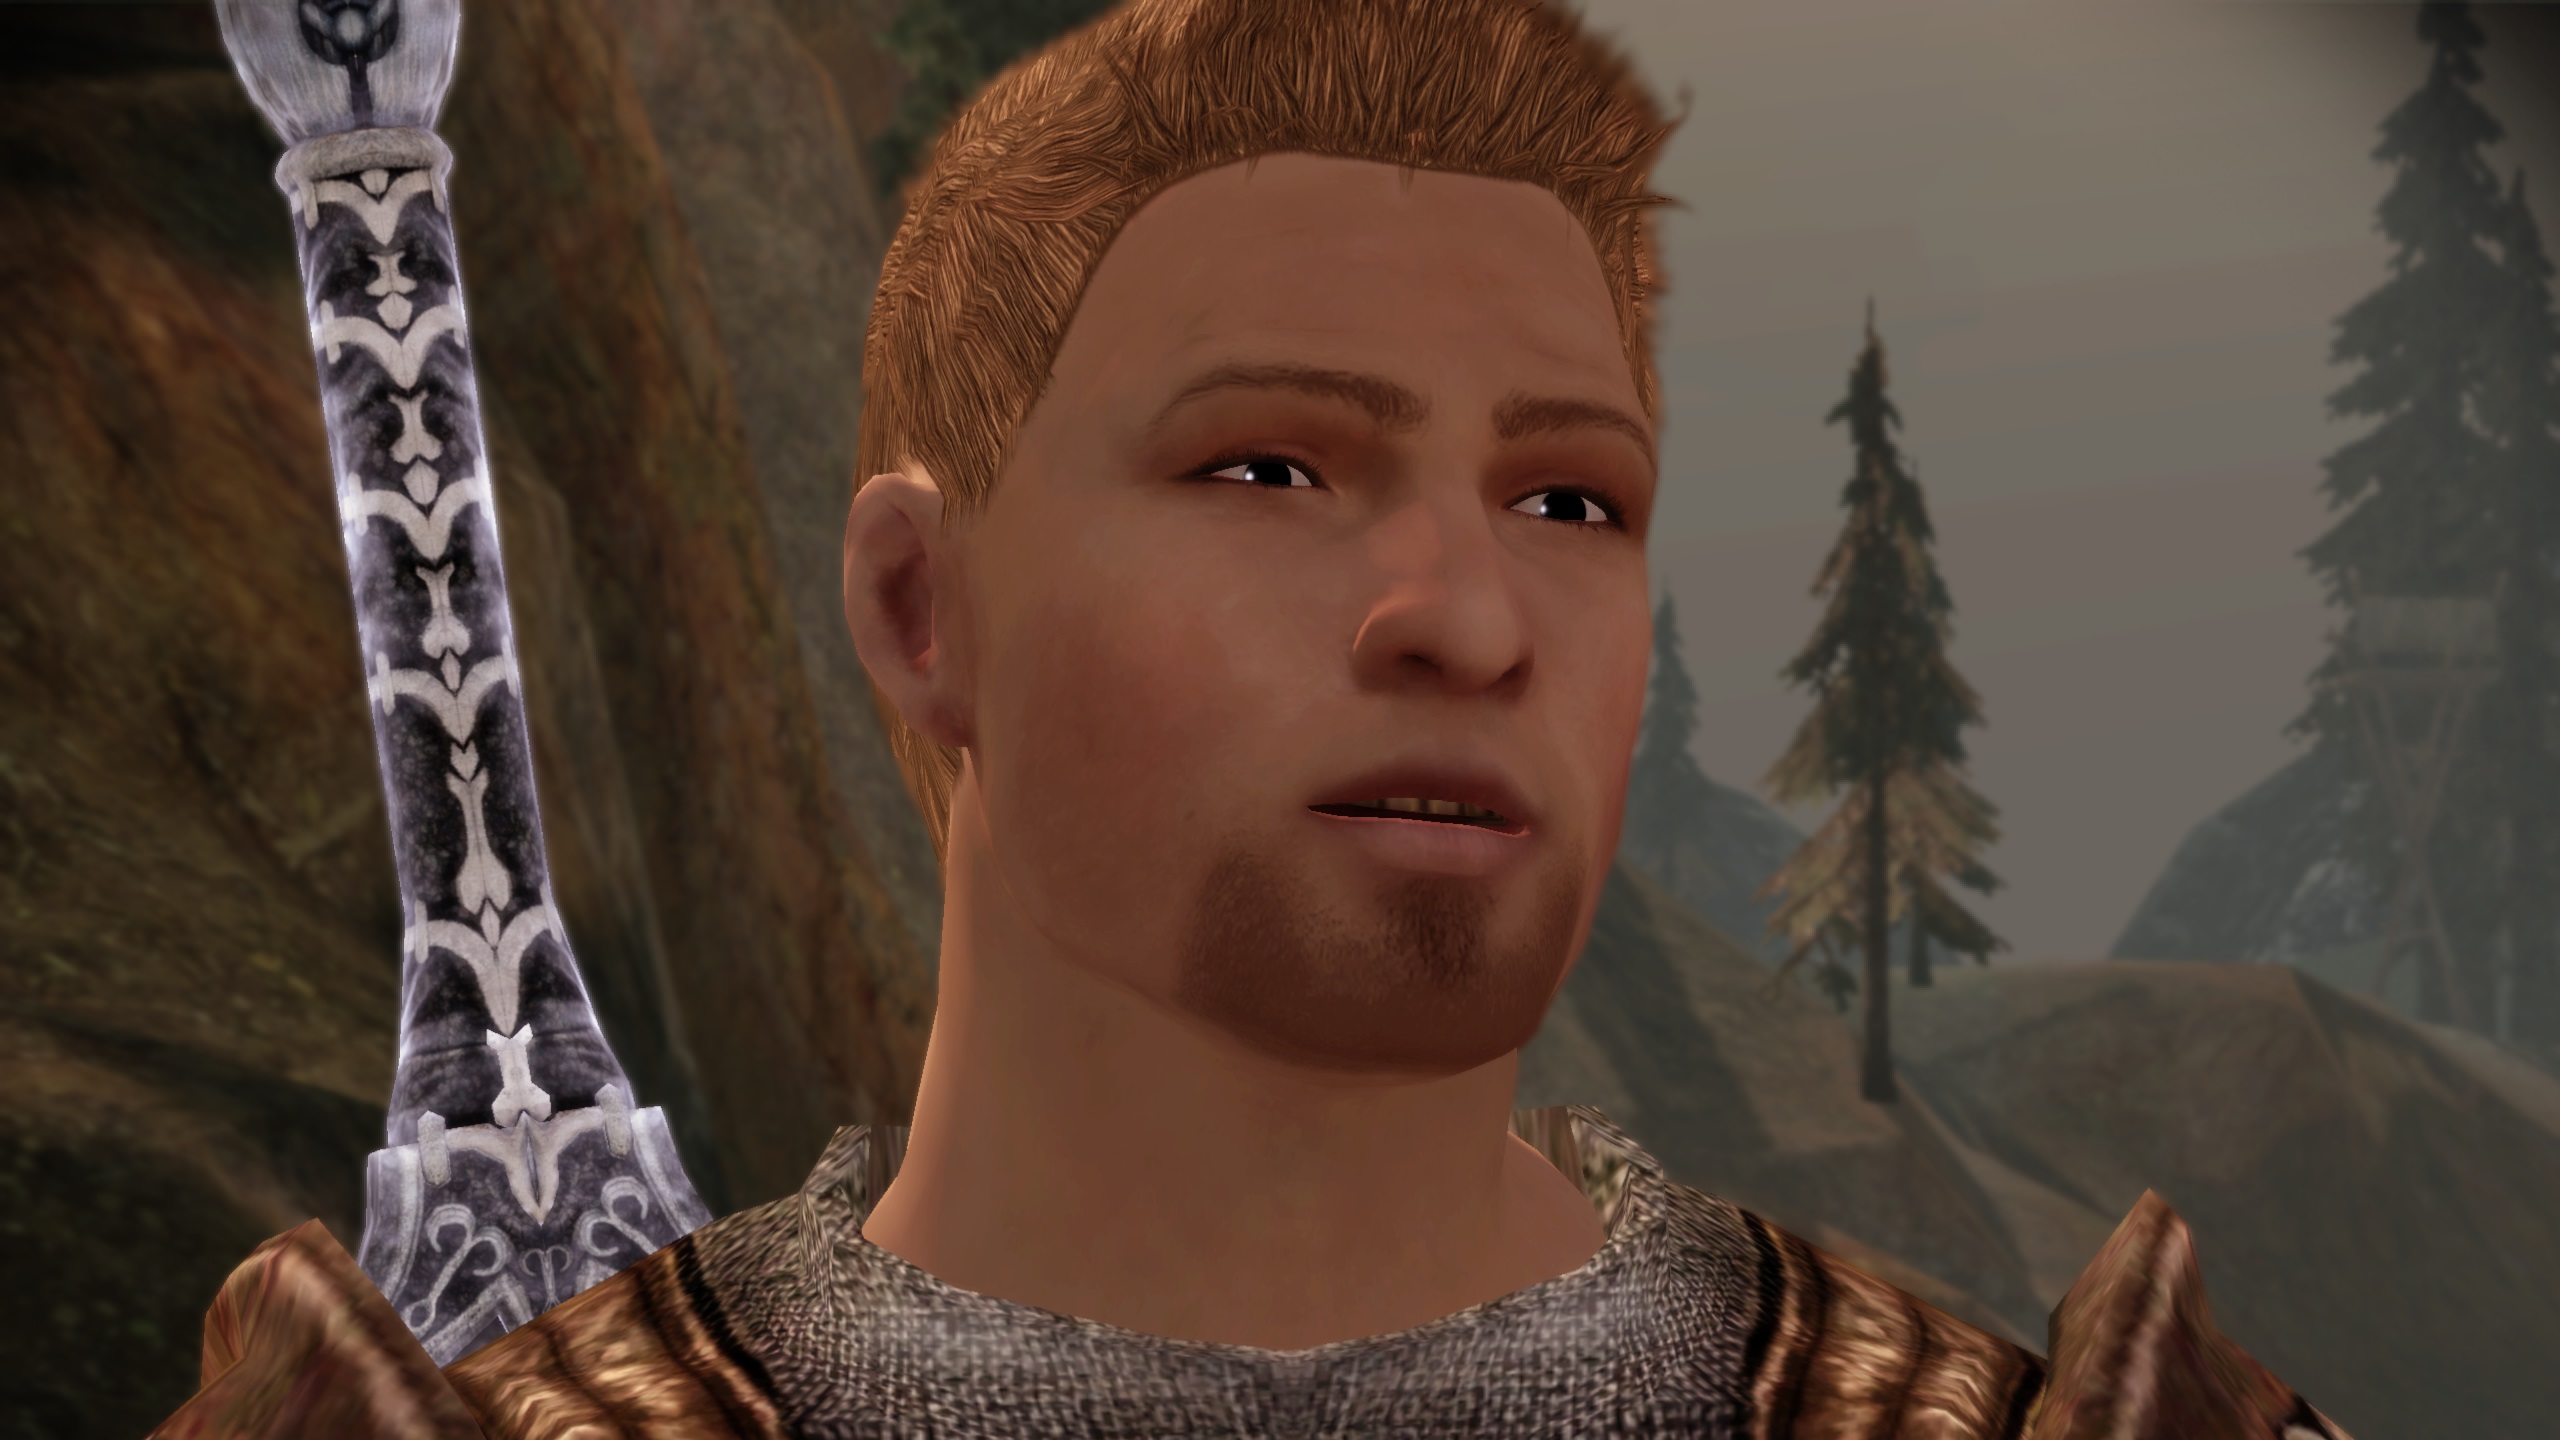 Meet the actual therapist using Dragon Age to teach relationship skills ...